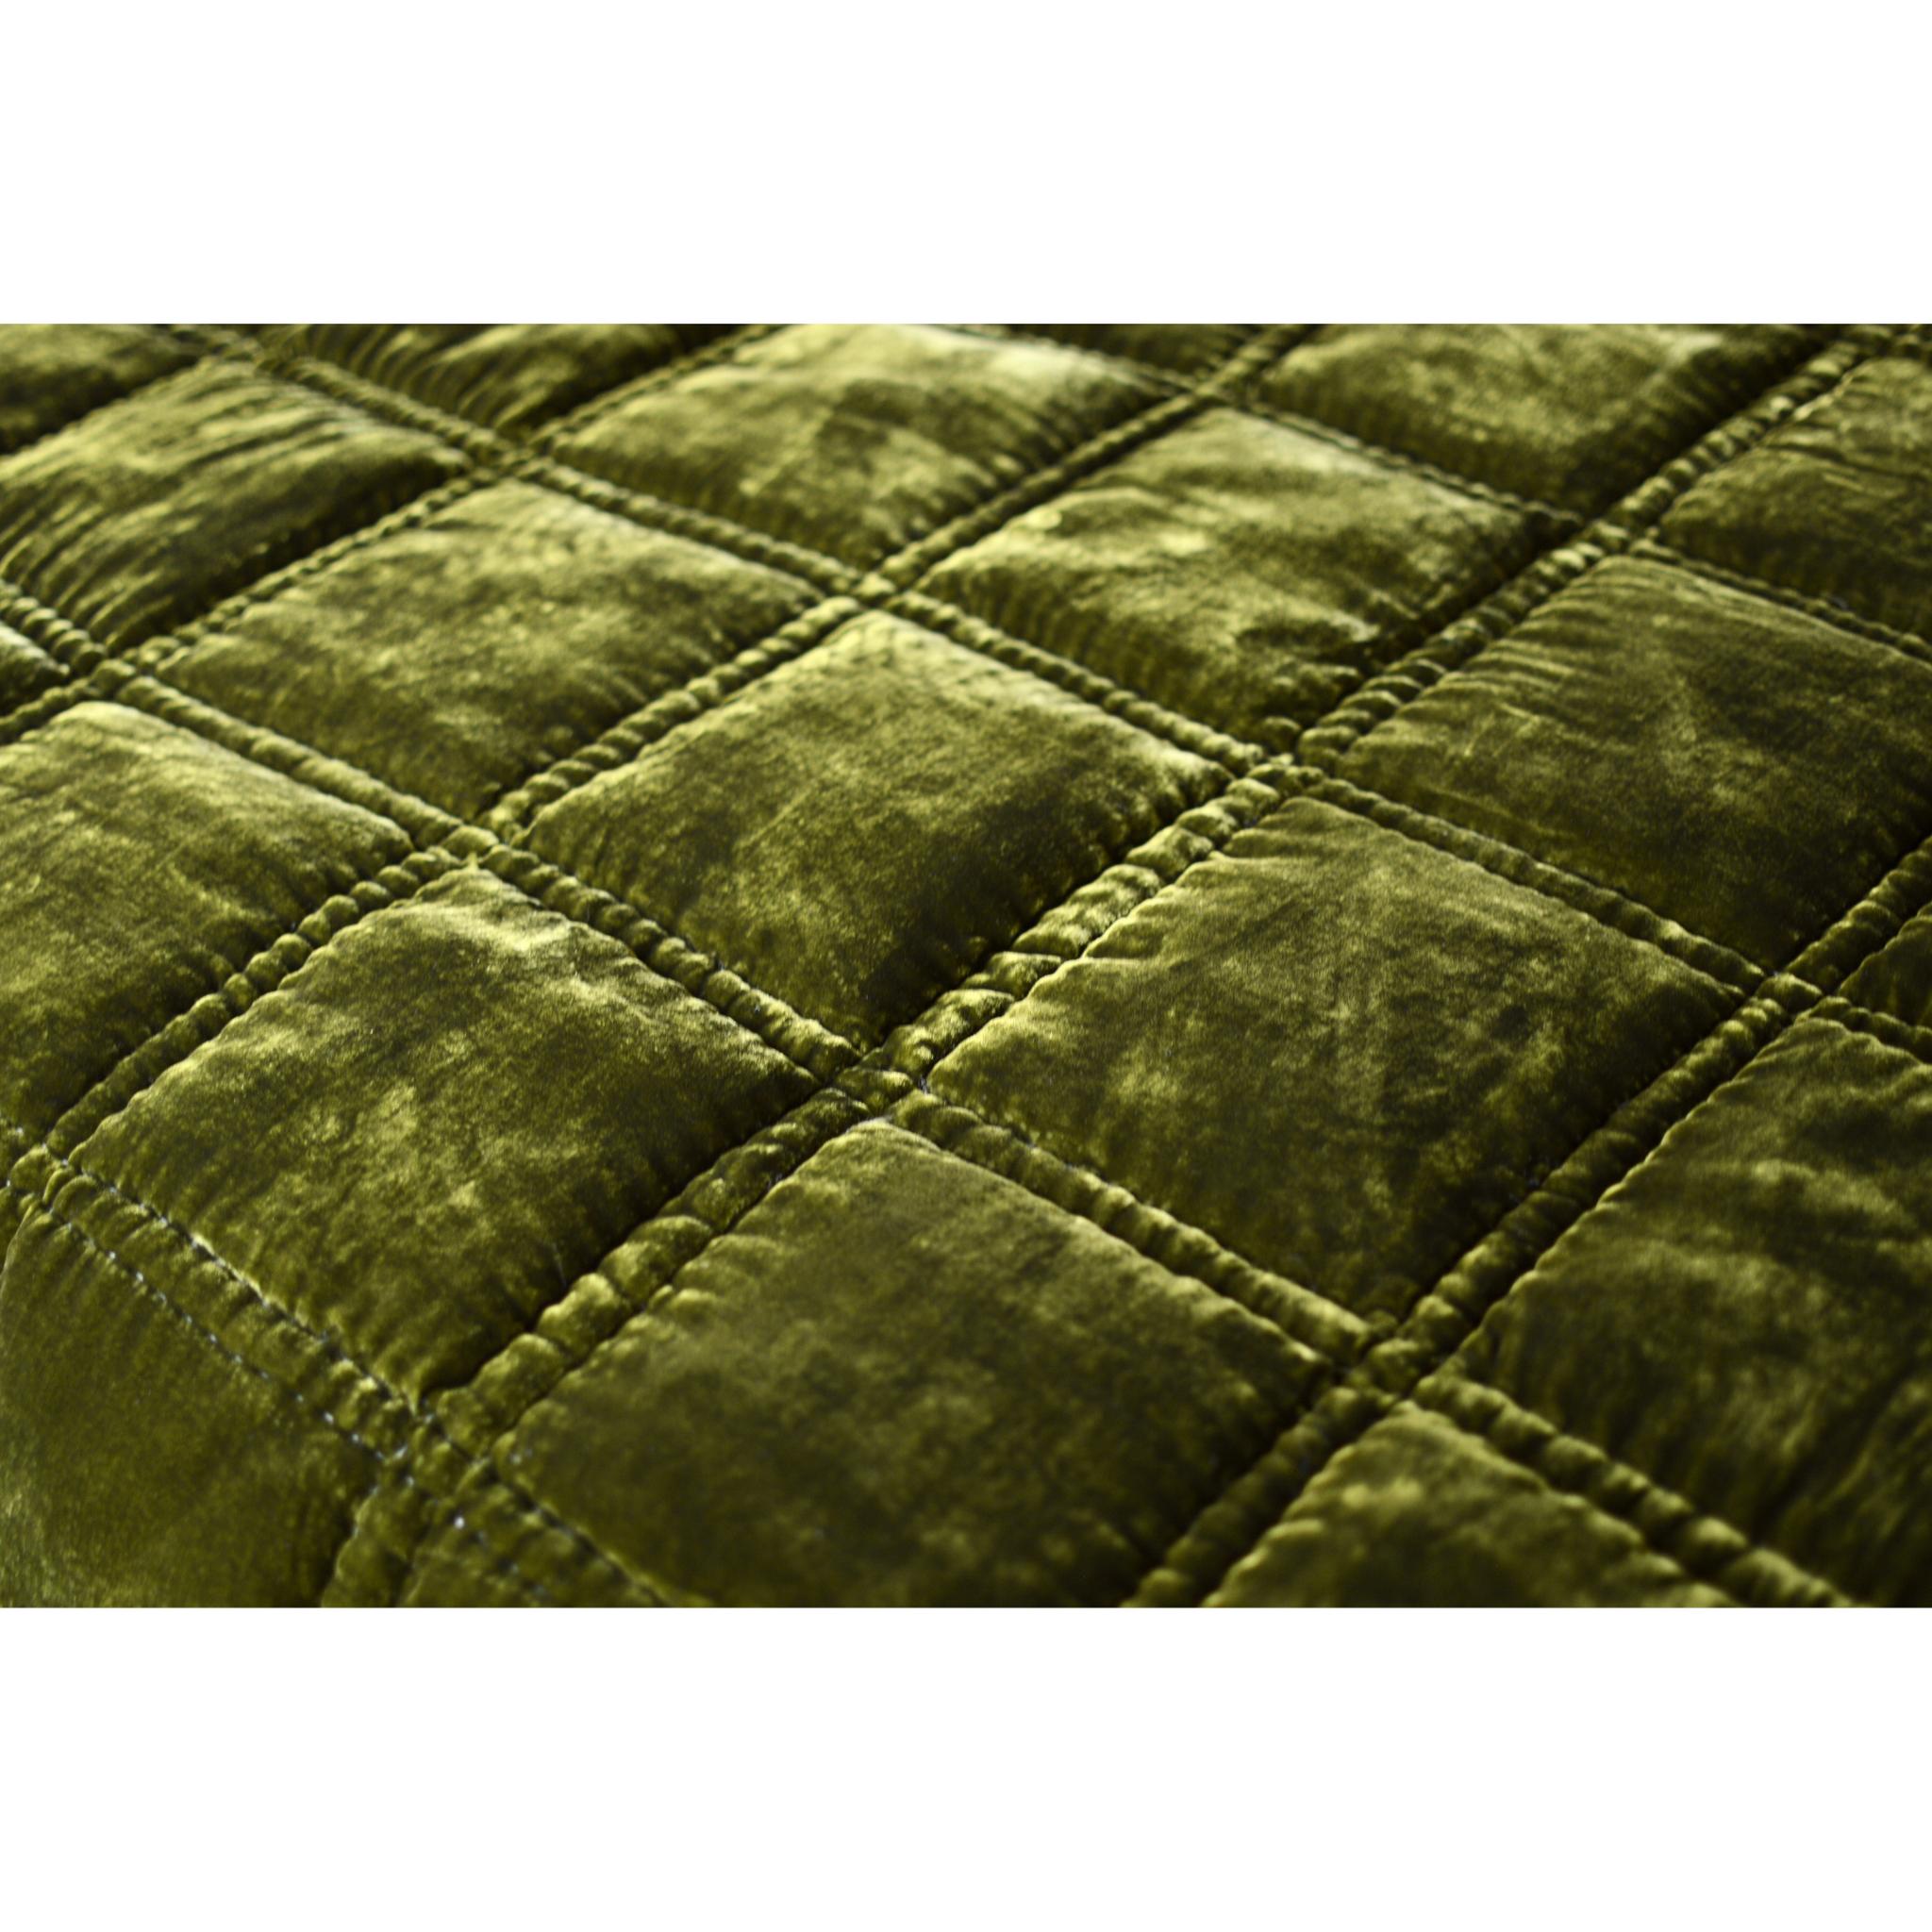 Silk Velvet Hand Quilted Throw Personal Blanket- Best Comforter Set - Big Square Hand Stitch-Olive Drab